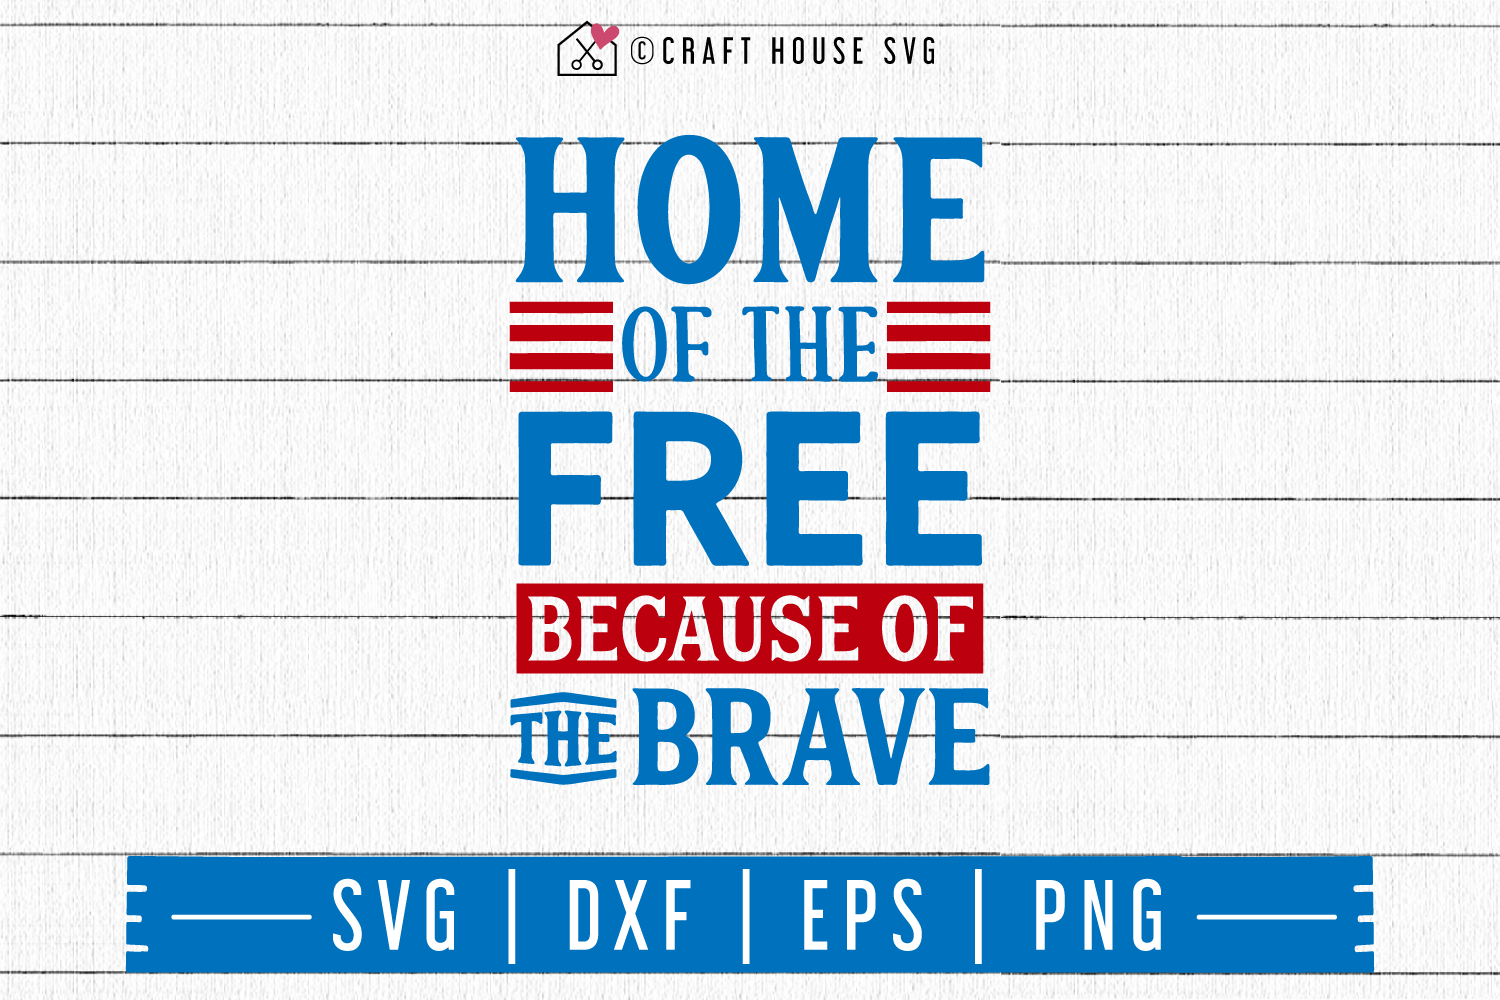 4th of July SVG file | Home of the free because of the brave SVG Craft House SVG - SVG files for Cricut and Silhouette